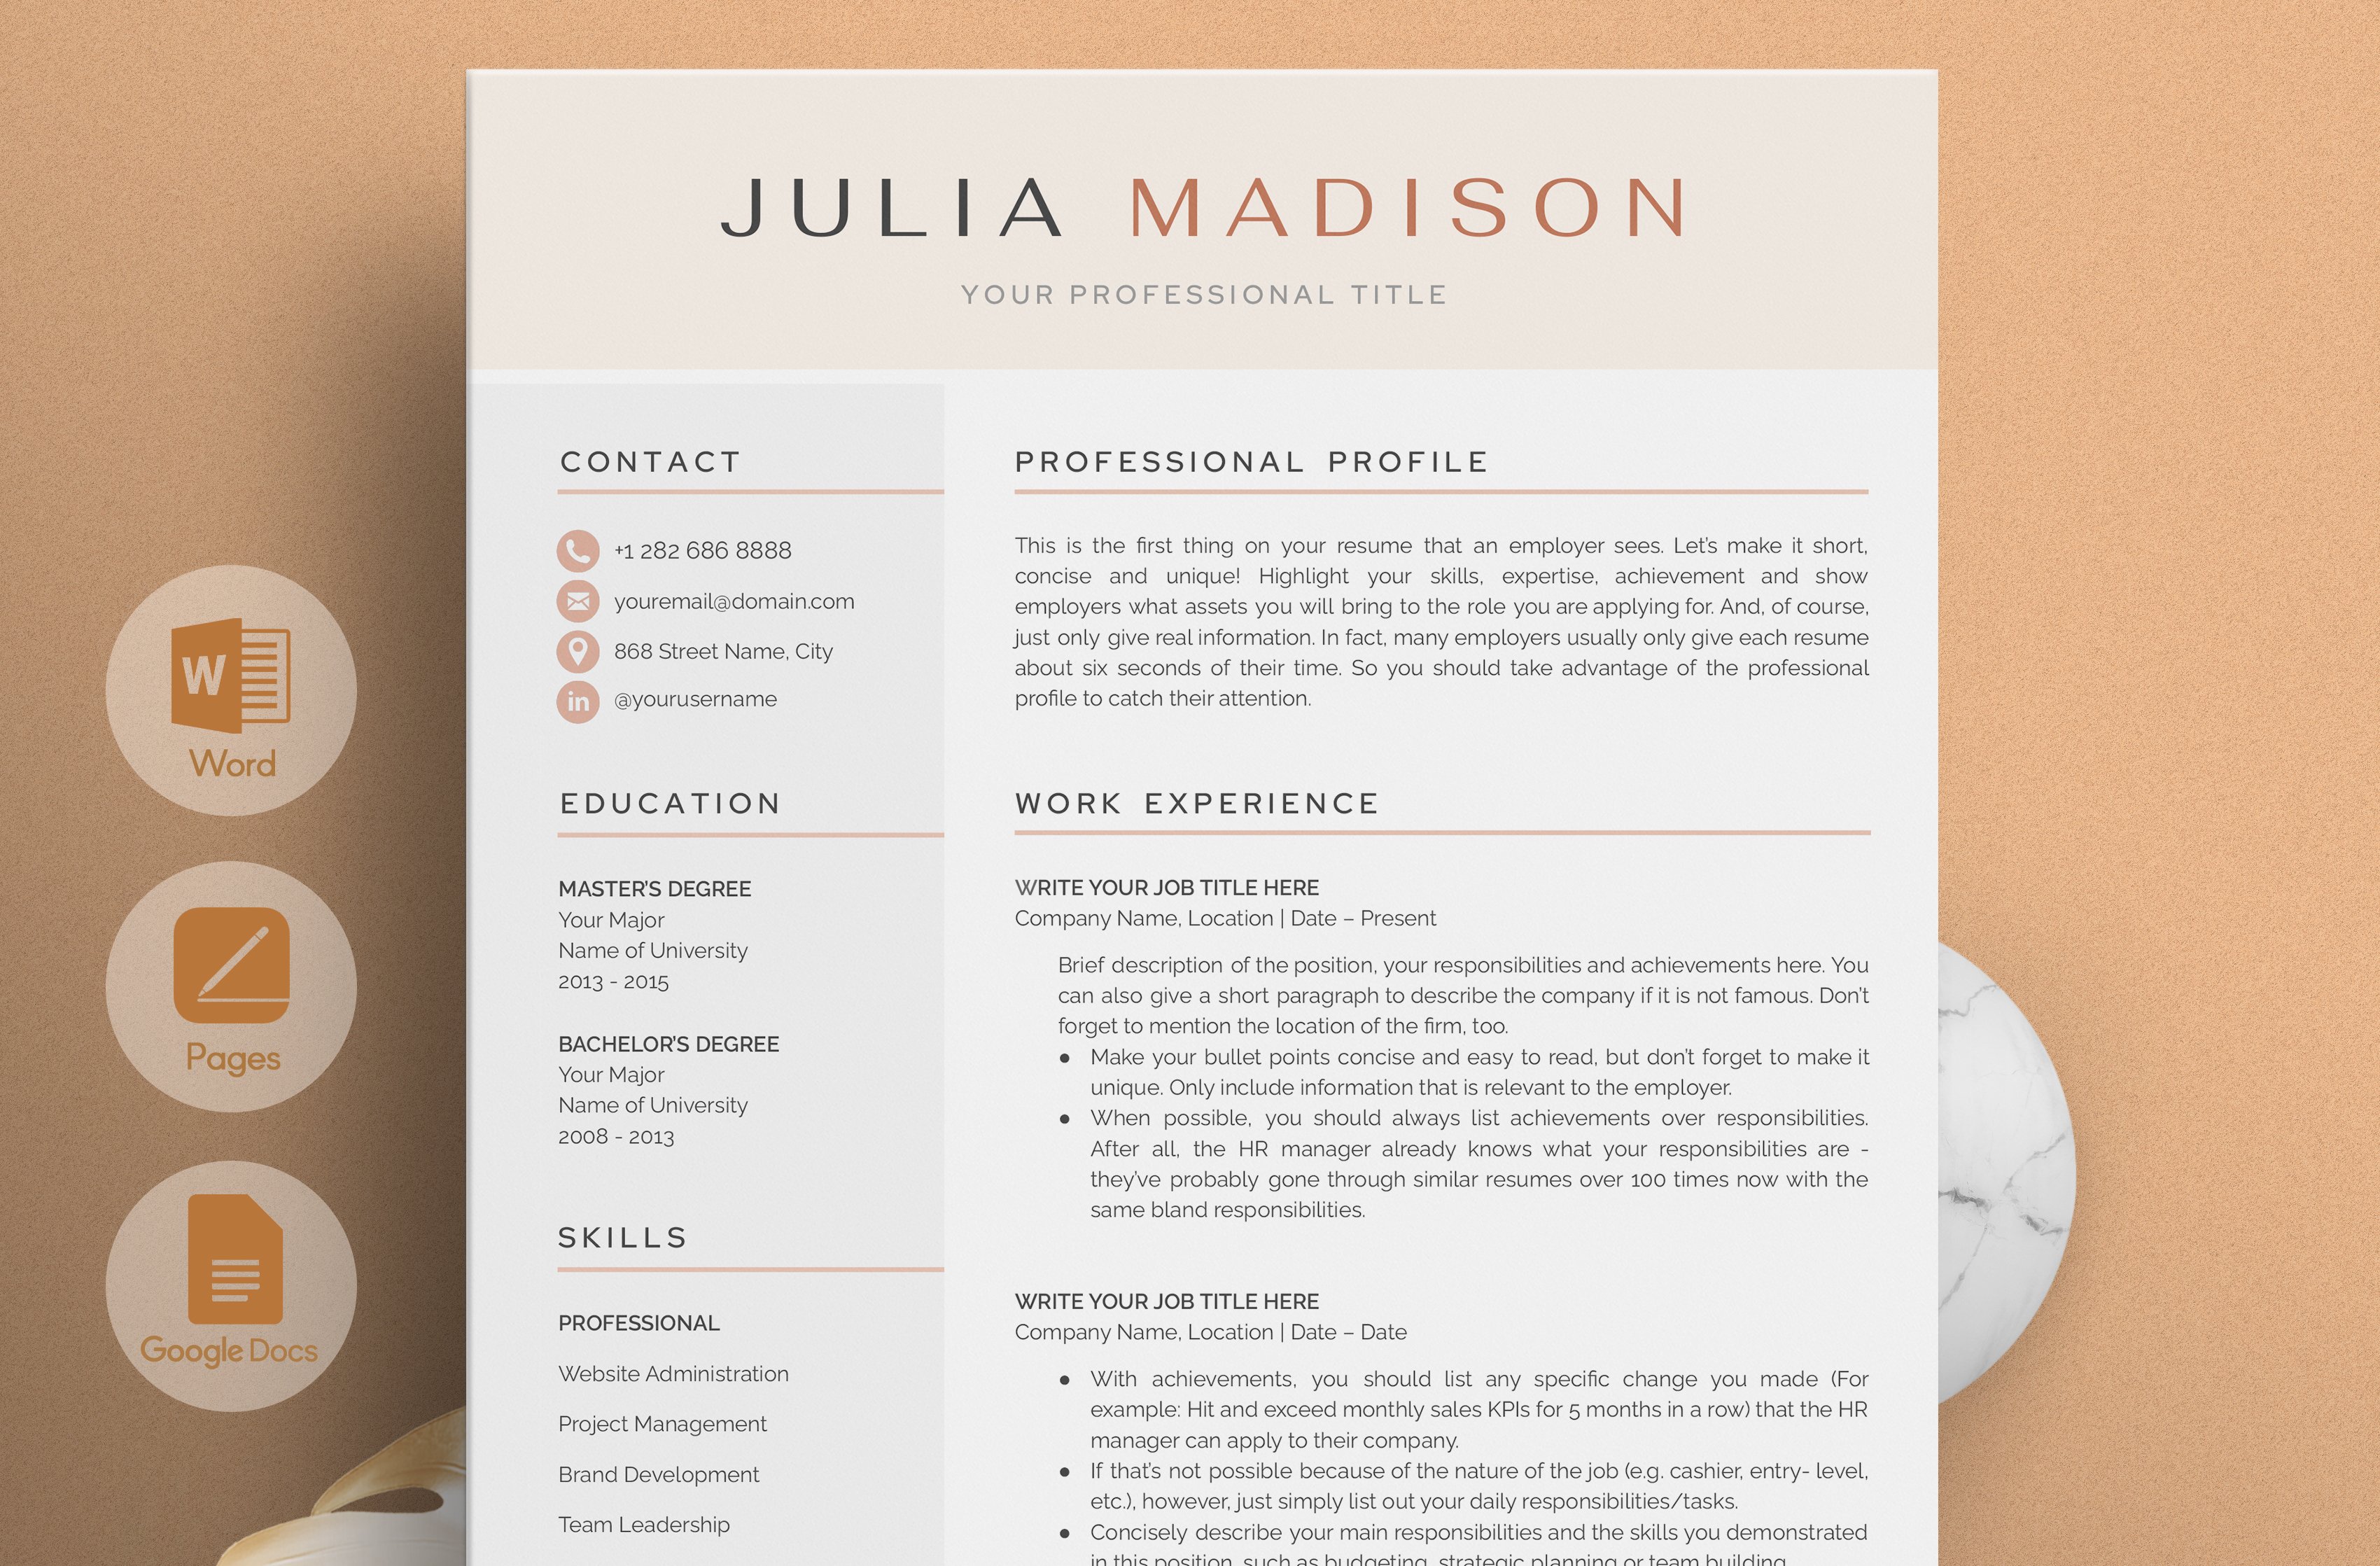 Resume/CV - The Madison cover image.